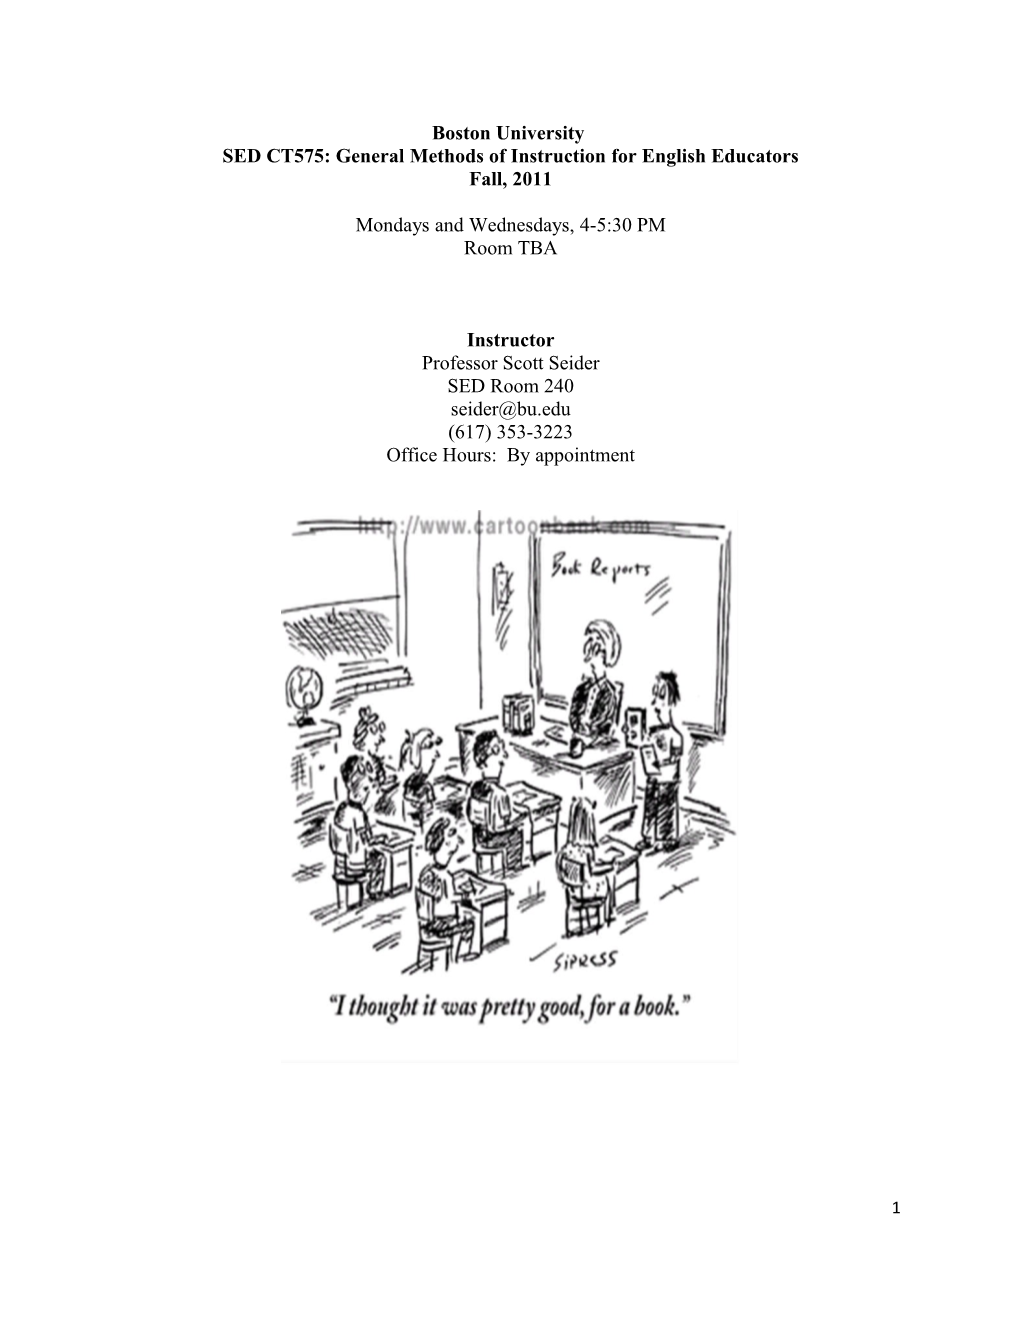 SED CT575: General Methods of Instruction for English Educators